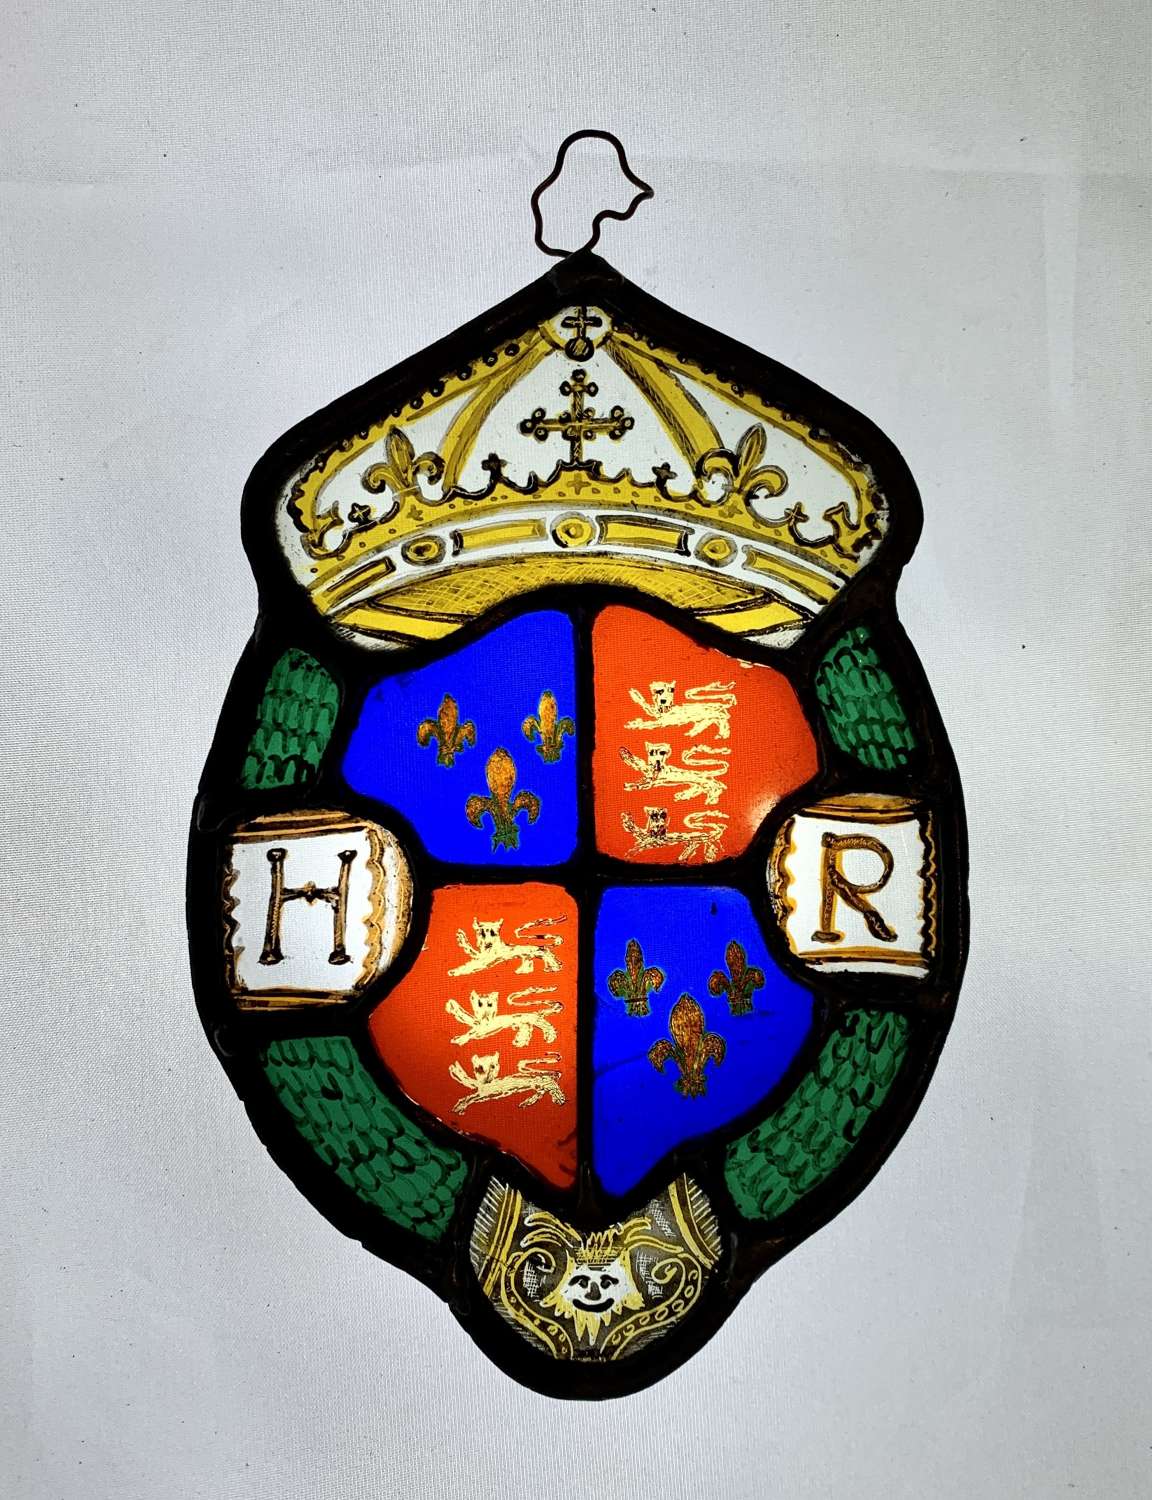 Stained Glass Fragment with Royal Tudor Coat of Arms, Henry VIII